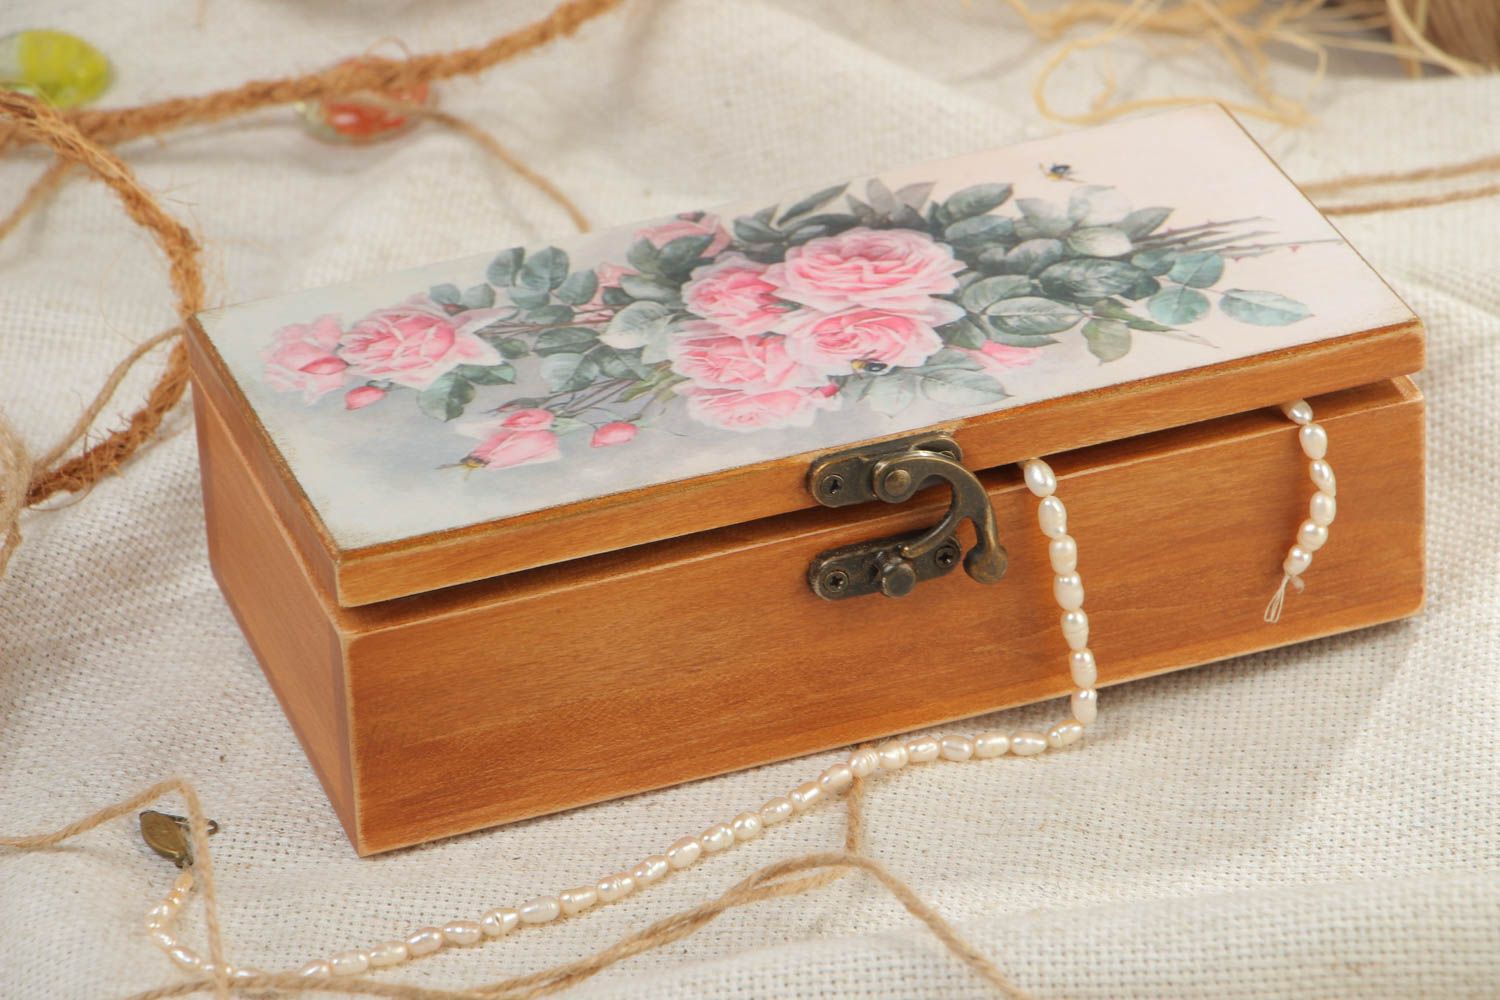 Handmade rectangular wooden jewelry box with floral print on a lid photo 1